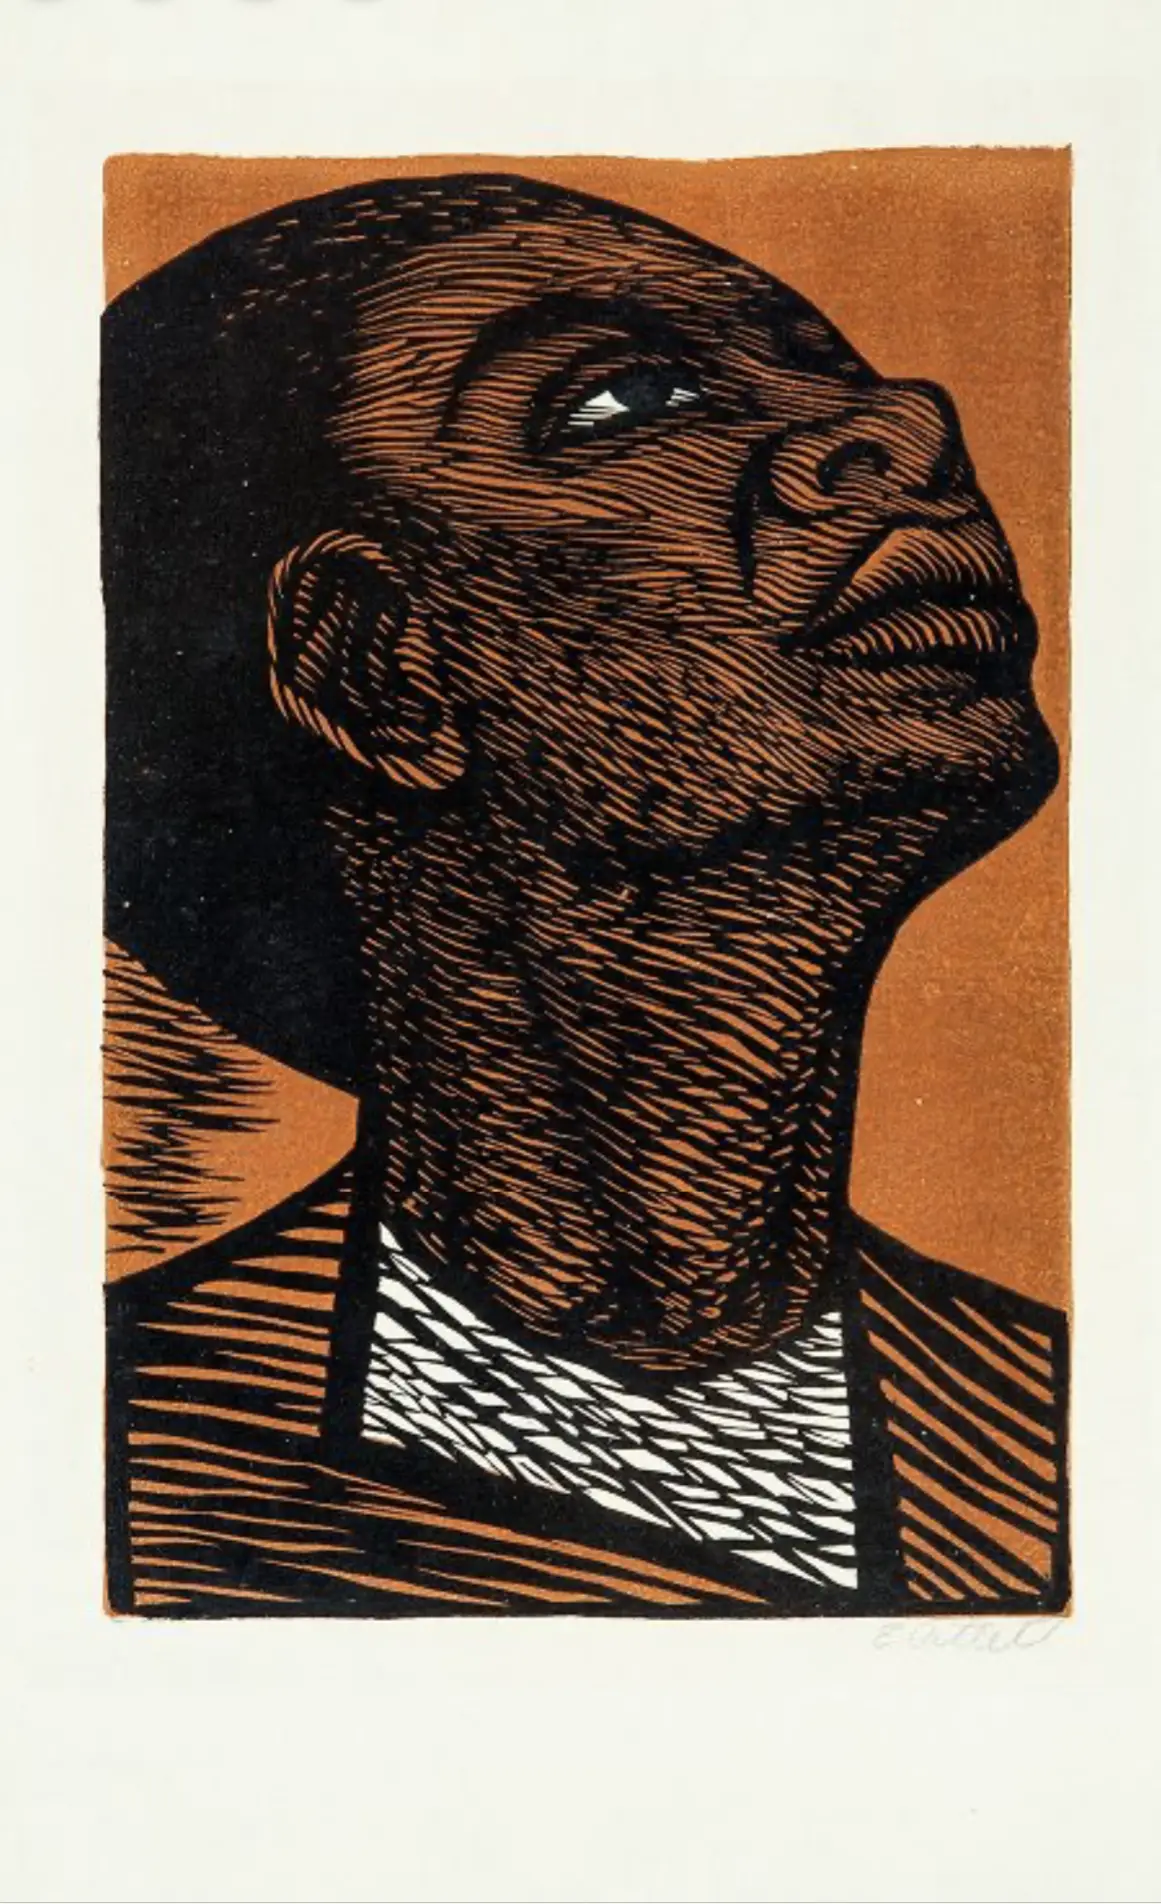 Of Her Becoming: Elizabeth Catlett’s Legacy in Chicago